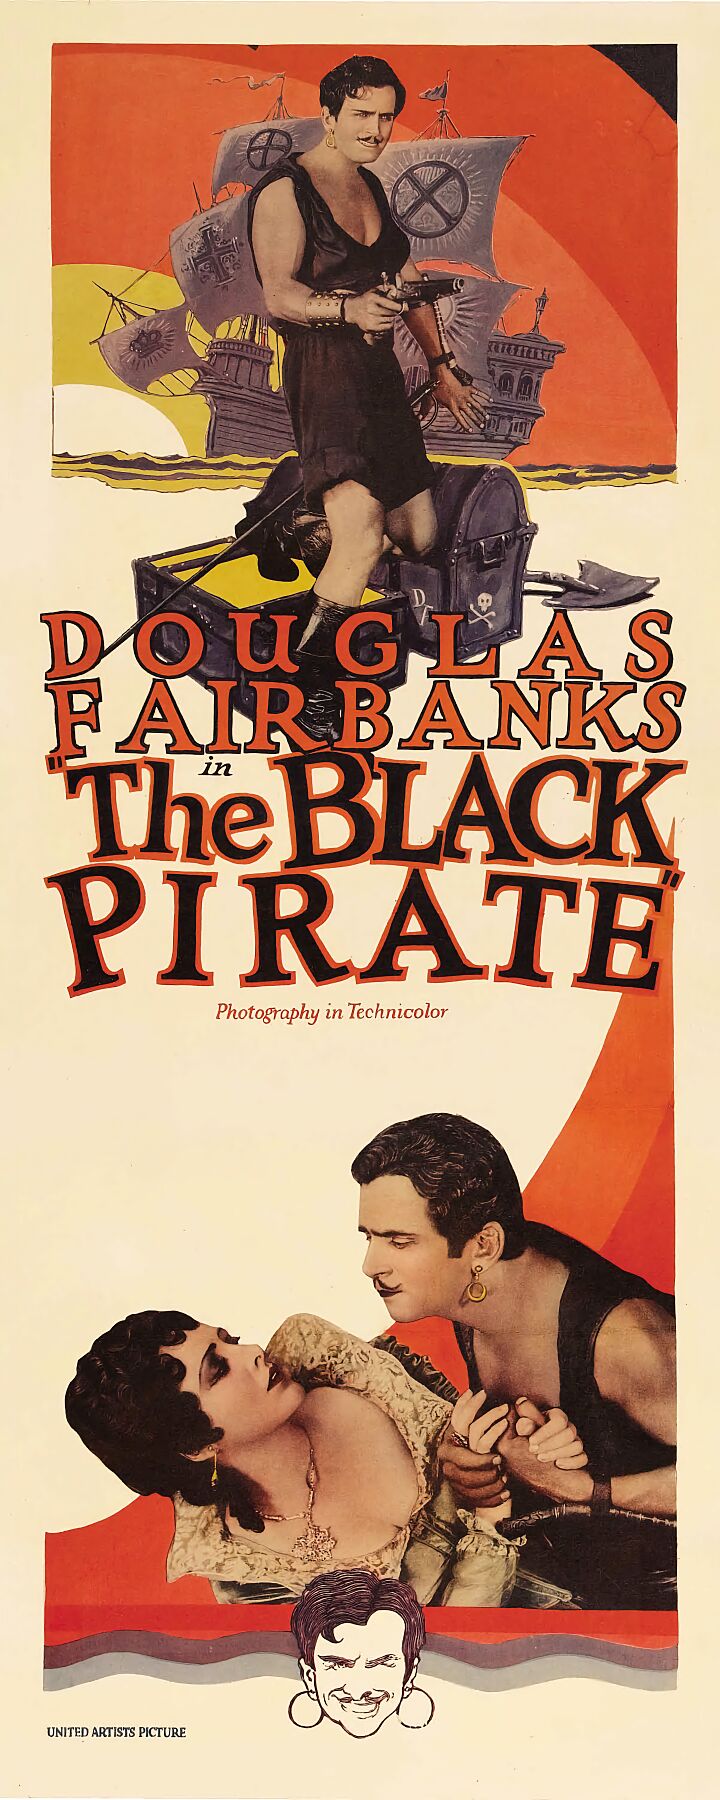 The Black Pirate is a 1926 US movie shot entirely in two-color Technicolor about an adventurer and a 'company' of pirates